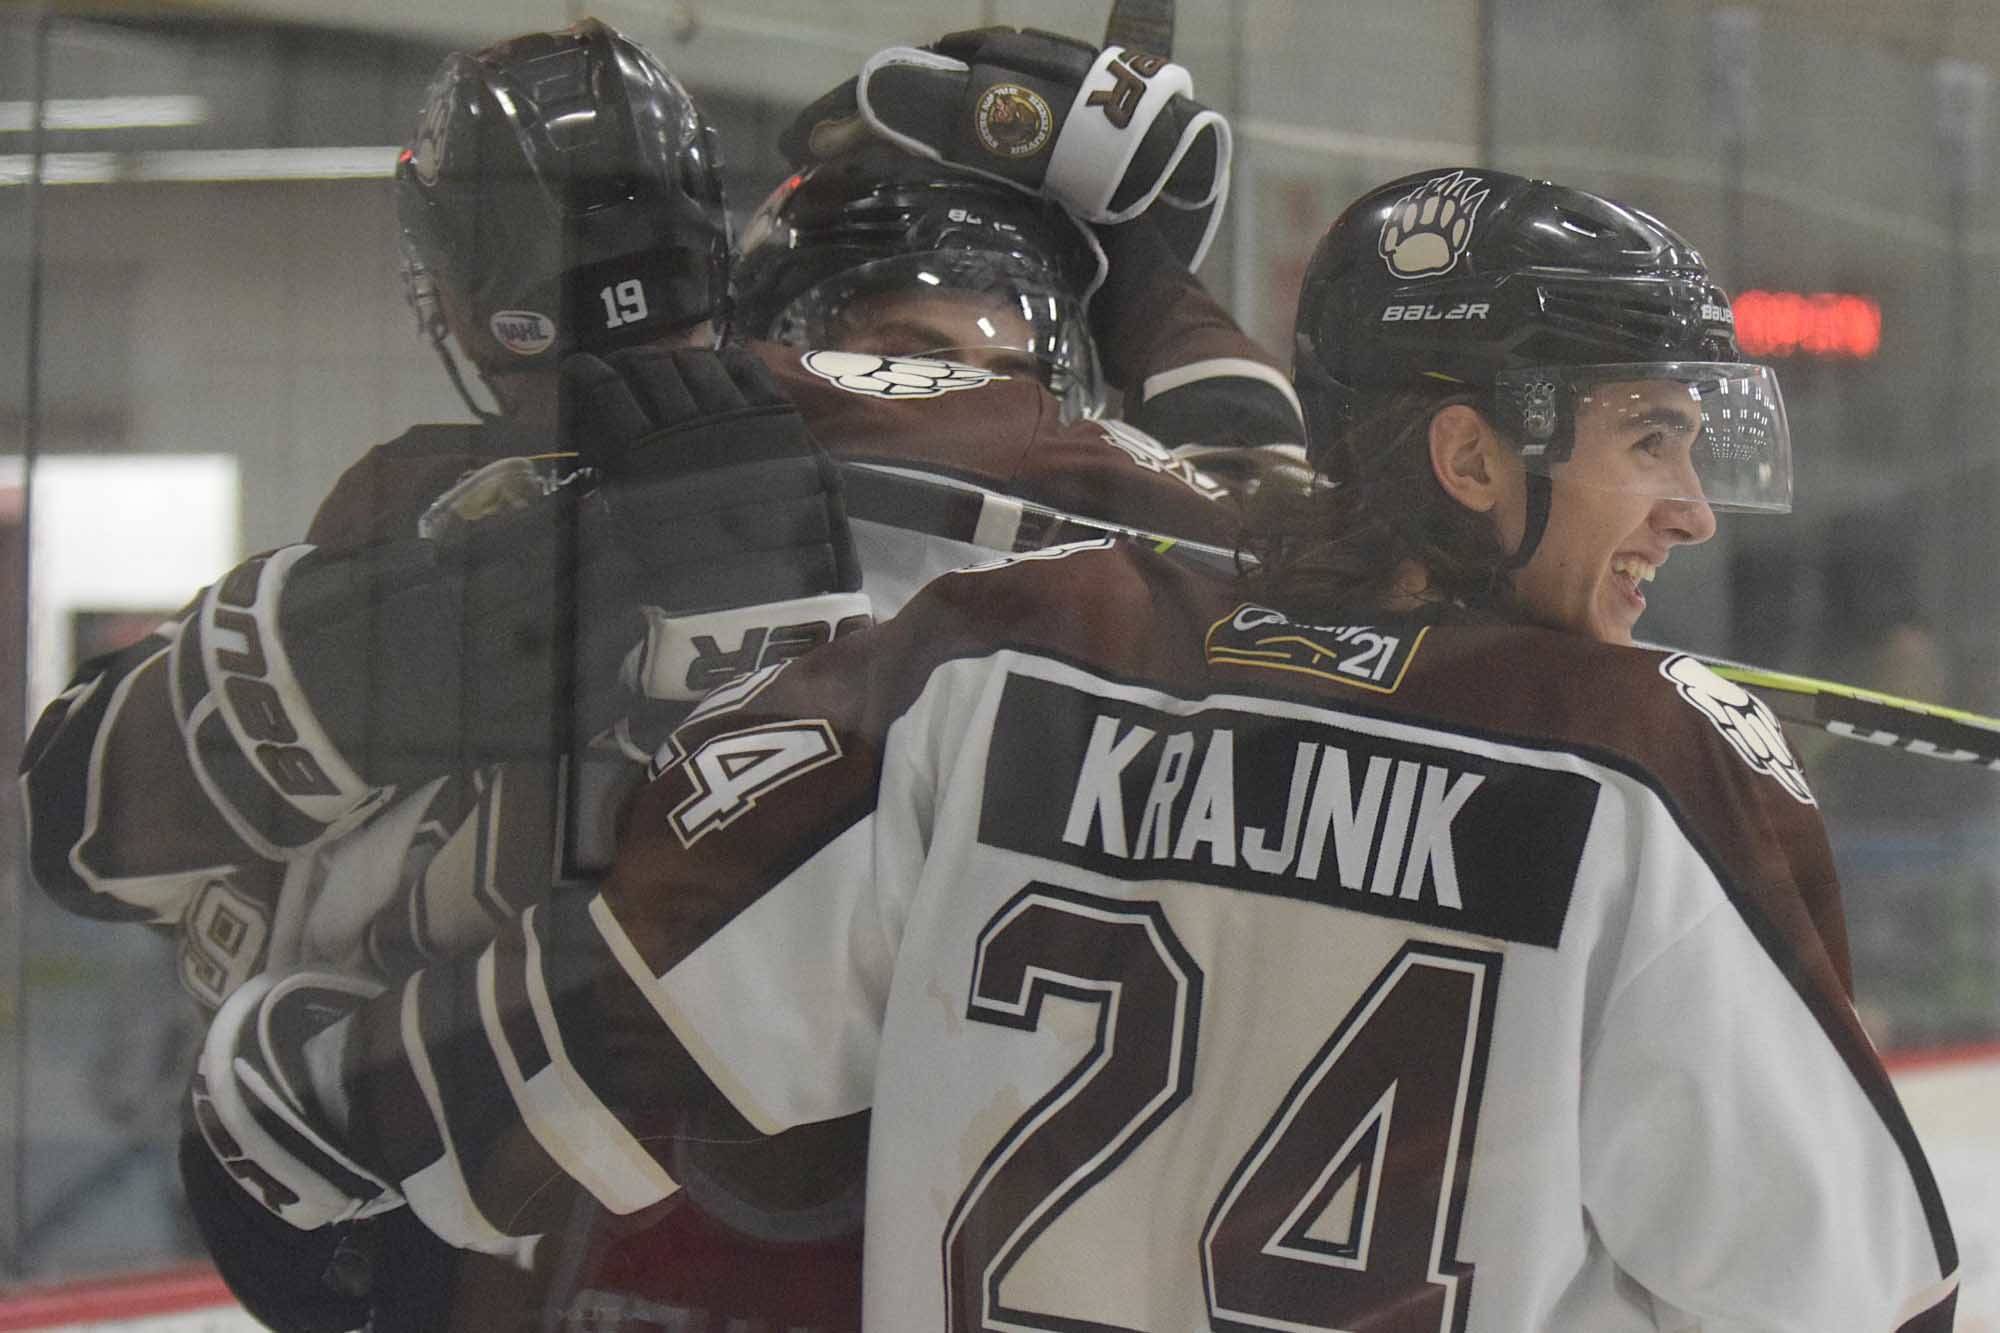 Eagle River’s Zach Krajnik and teammates celebrate the second-period goal of Michael Spethmann against the Chippewa (Wisconsin) Steel on Friday, Oct. 5, 2018, at the Soldotna Regional Sports Complex. (Photo by Jeff Helminiak/Peninsula Clarion)